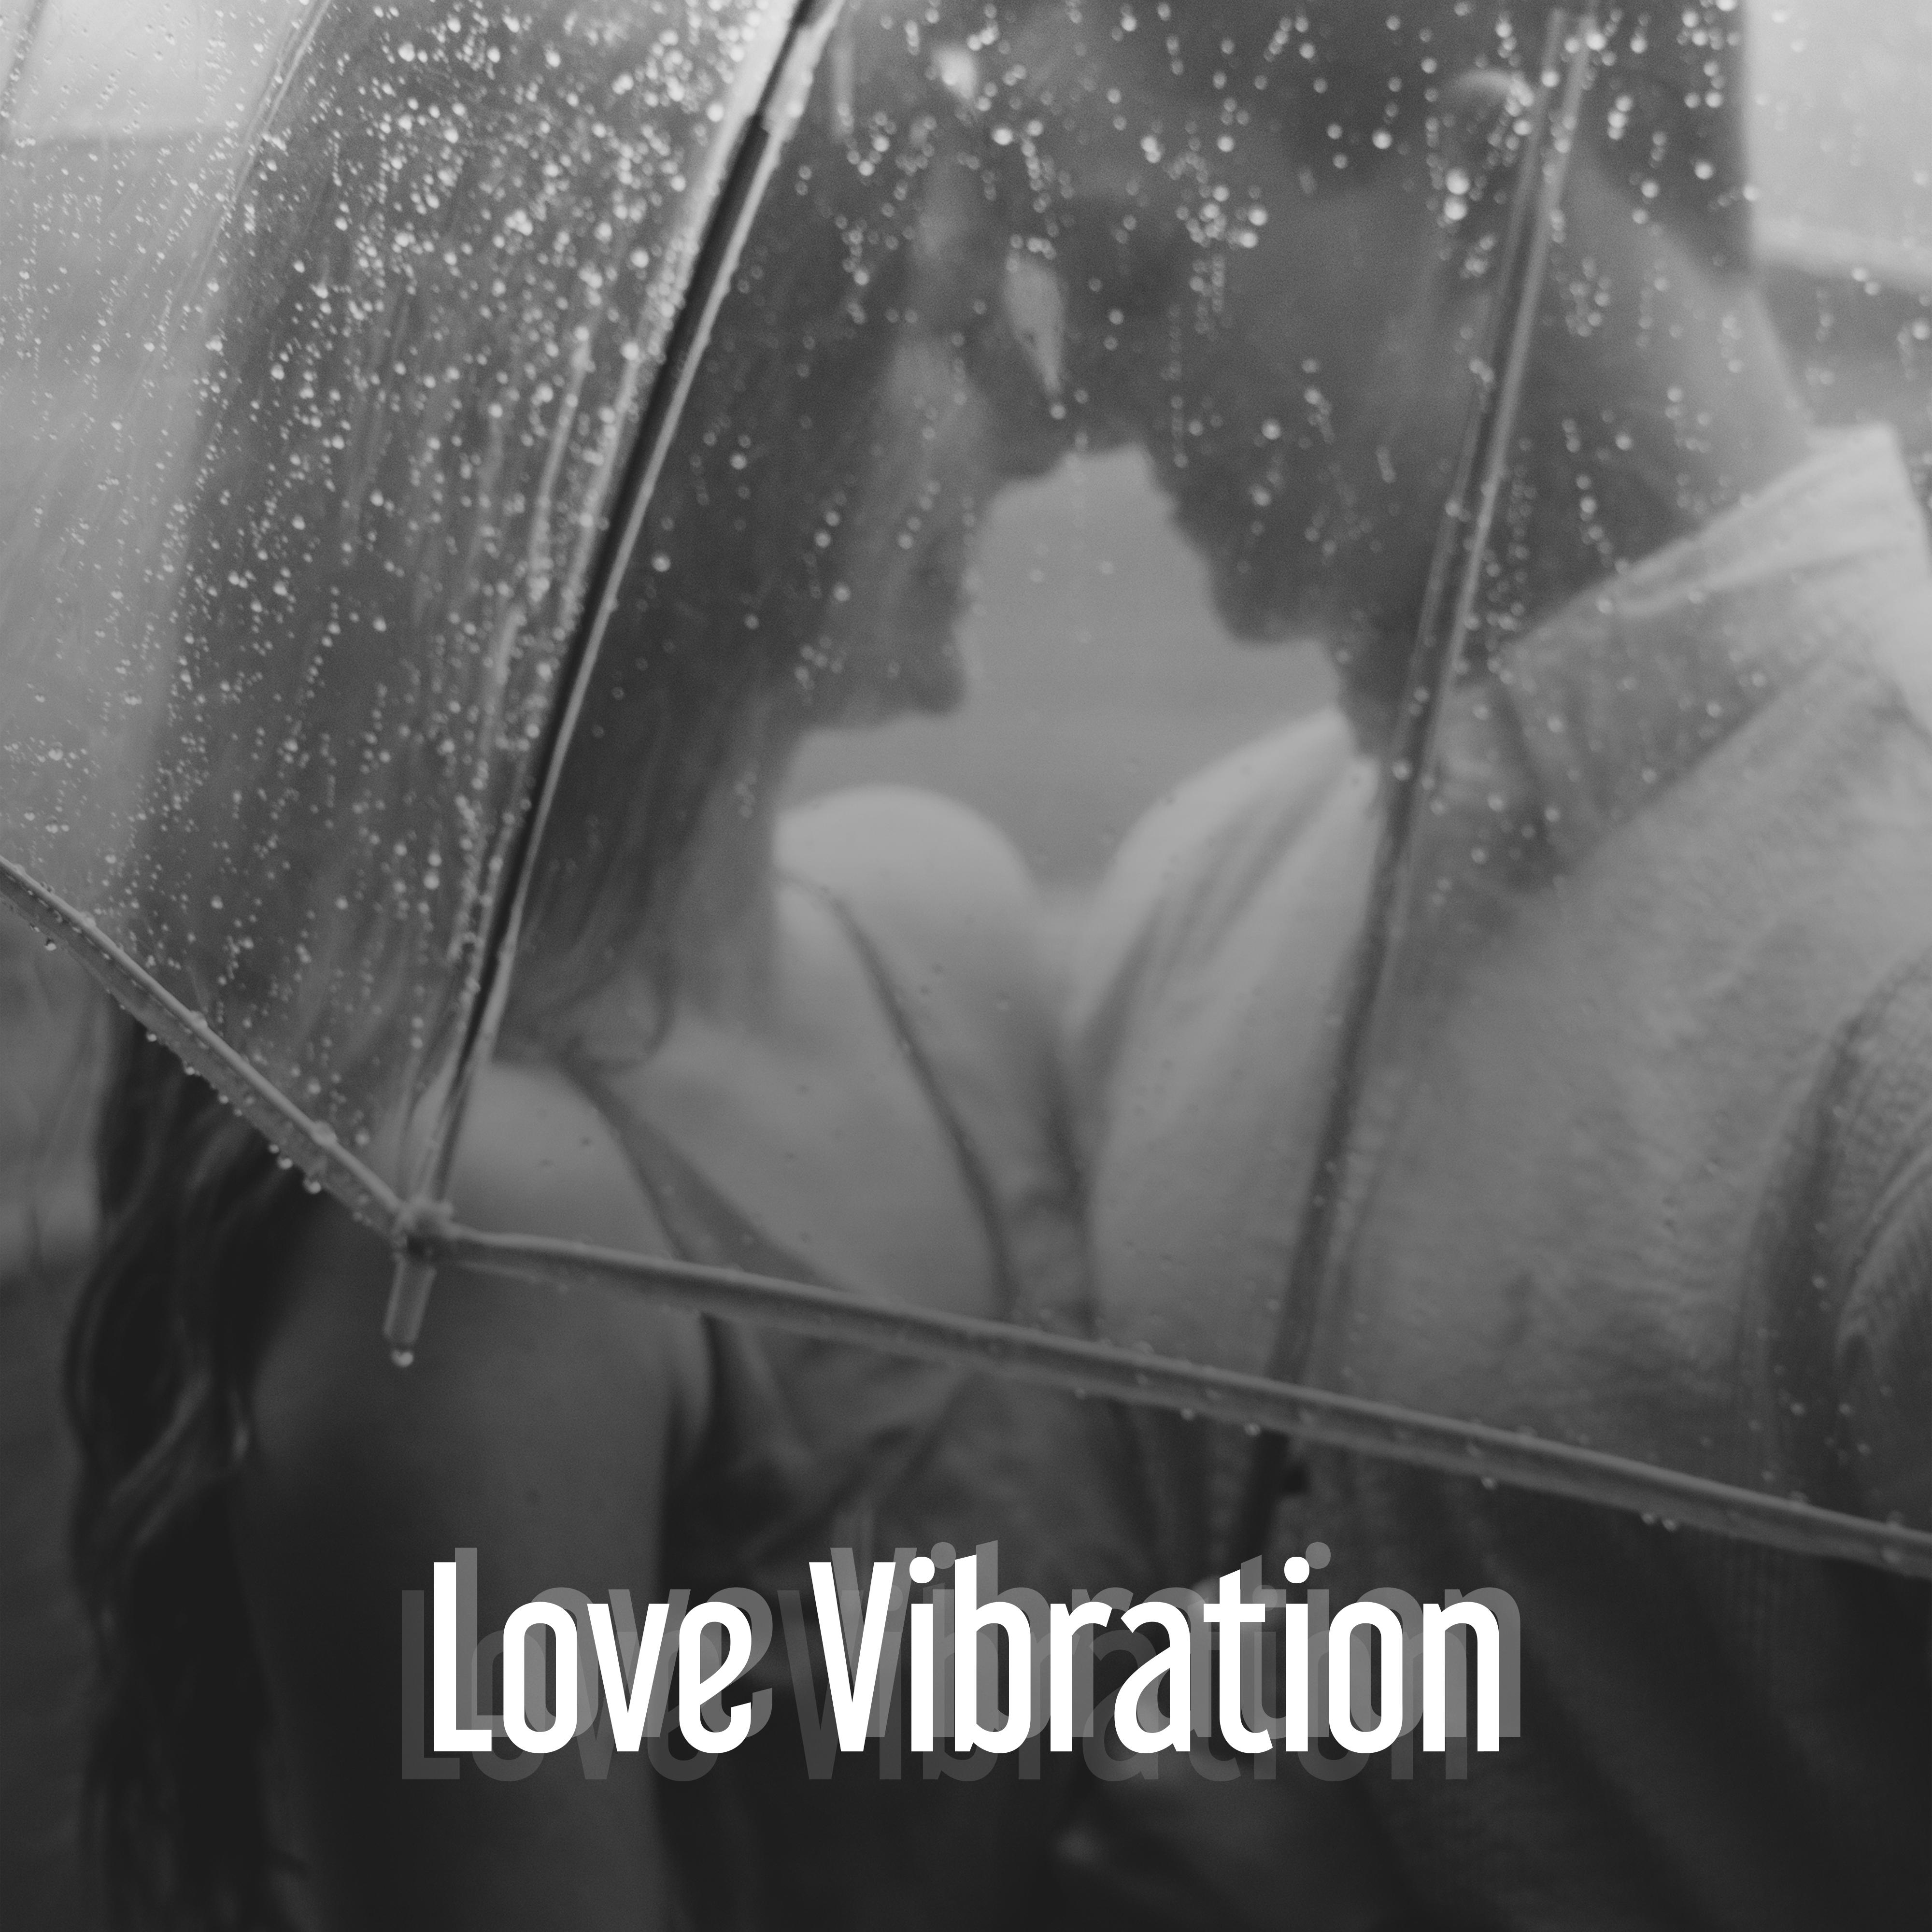 Love Vibration  Sensual Jazz Music, Relaxation Sounds, Romantic Evening, Soothing Piano Jazz, Intimate Time